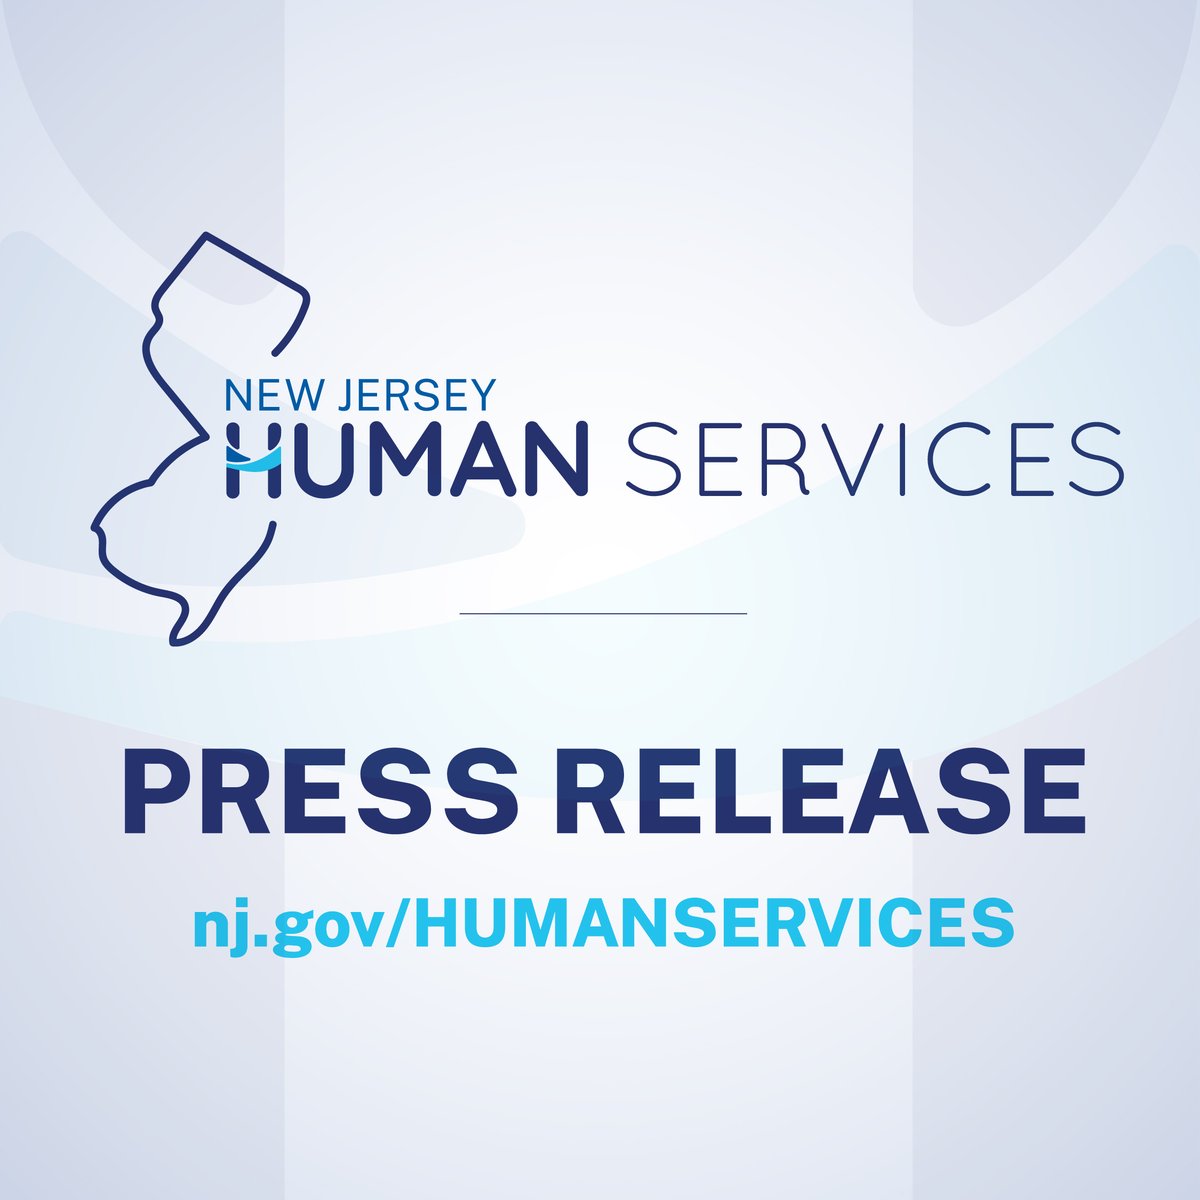 .@TrentonHealth Uses IHC Grant to Enhance Food Access for People with Disabilities
“The Trenton Health Team has been a great partner, & we applaud their commitment to reaching out to and serving individuals w/ disabilities,' @NJDHS Comm'r @sarahmadelman. 
nj.gov/humanservices/…